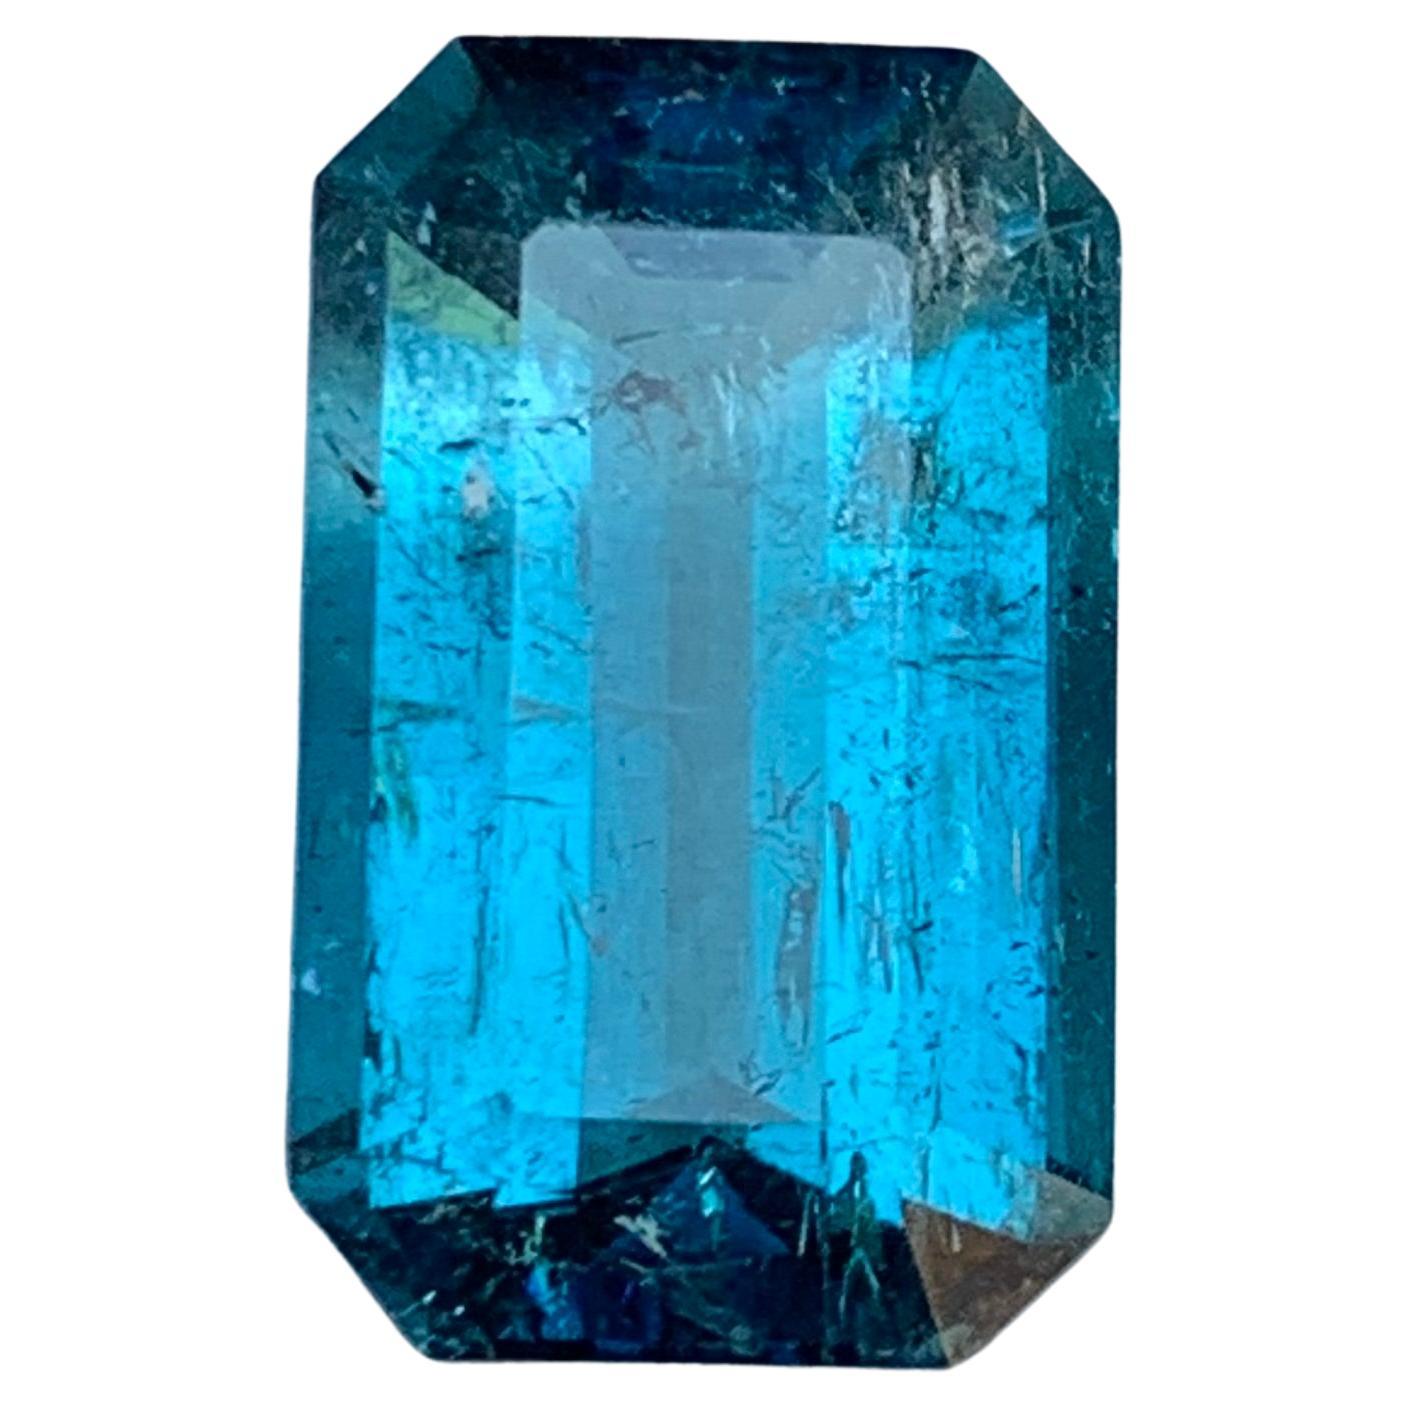 Rare Rich Electric Blue Tourmaline Gemstone 7.20 Ct Emerald Cut for Ring/Pendant For Sale